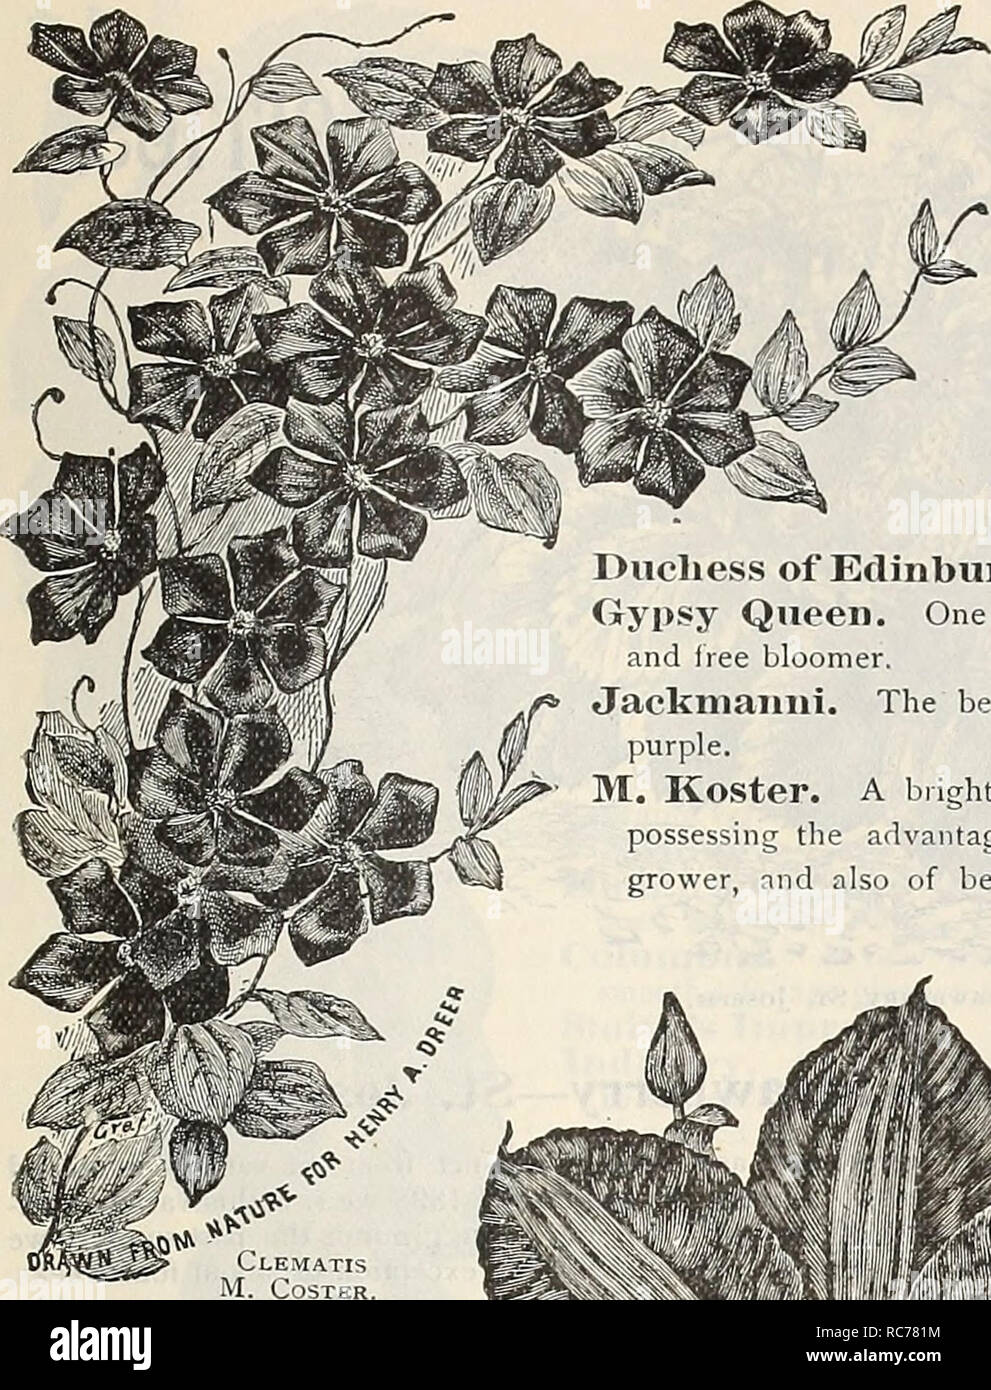 . Dreer's garden calendar : 1900. Seeds Catalogs; Nursery stock Catalogs; Gardening Equipment and supplies Catalogs; Flowers Seeds Catalogs; Vegetables Seeds Catalogs; Fruit Seeds Catalogs. 175. Small Flower- ing Clematis. Clematis Cocciuea. A very handsome, hardy climber, bearing thick bell-shaped flowers of a bright coral-red color; bloums with wonderful profusion from June un- til frost. 25 cts. each; 5 for 11.00. Clematis Crispa. A very beautiful species, bearing an abundance of pretty bell-shaped, fragrant, lavender flow- ers with white centre. Blooms from June until frost, 25 cts. each;  Stock Photo